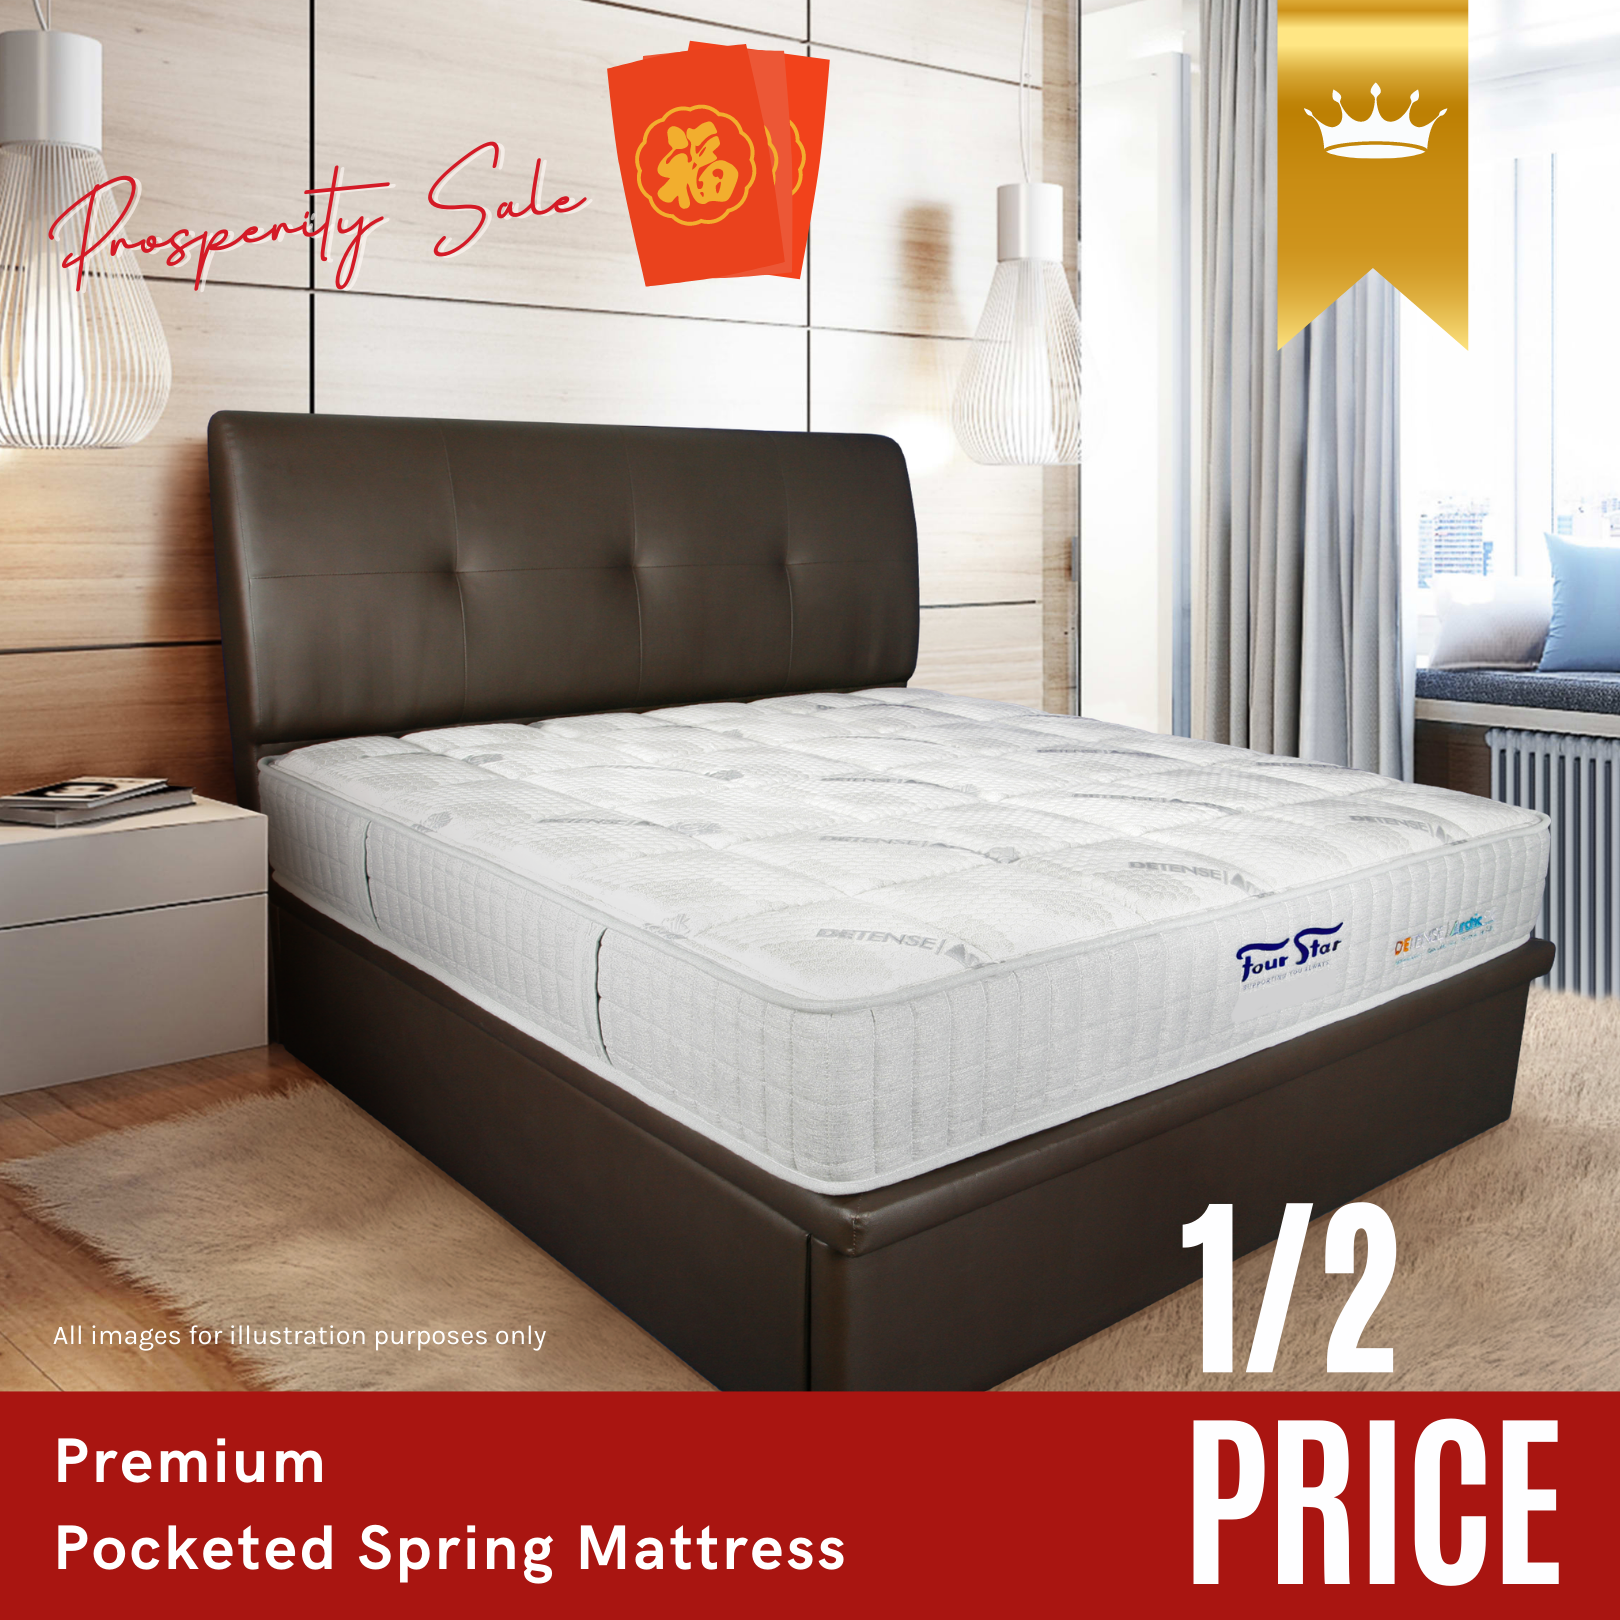 Lobang: Four Star's CNY Prosperity Sale Has Over 5,000 Items At 50% Off Including Mattresses, Bed Frames, Sofas & More - 5